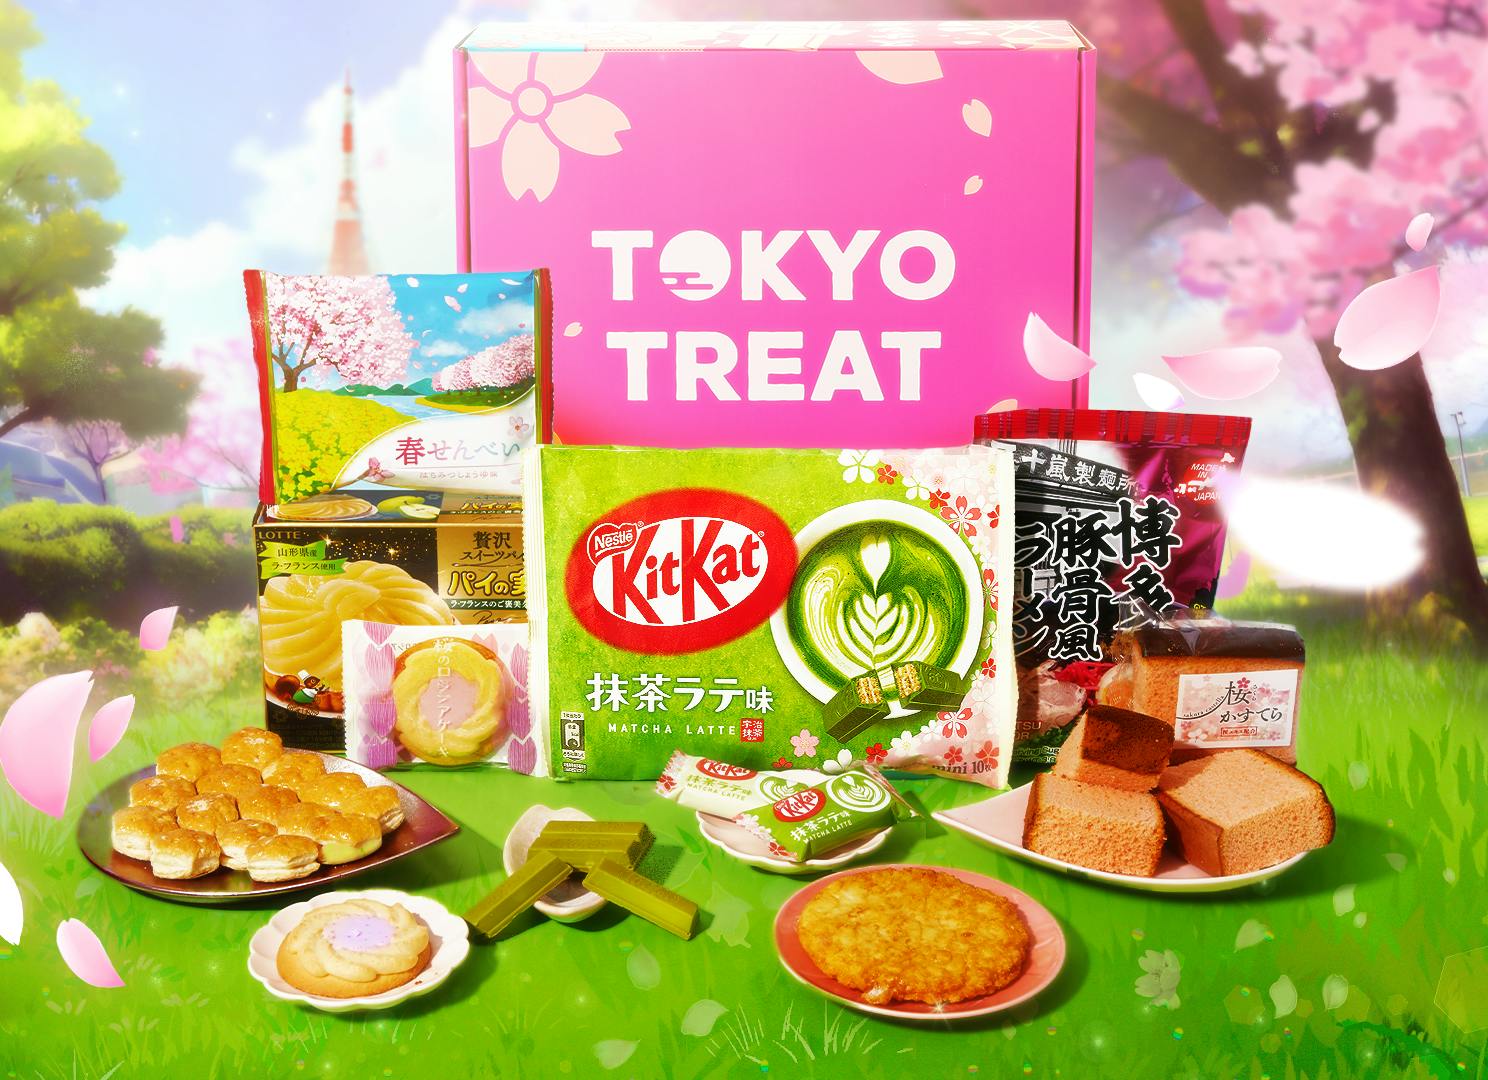 TokyoTreat's limited-edition pink sakura box sits in a beautiful park on a bright spring day, surrounded by main box items.